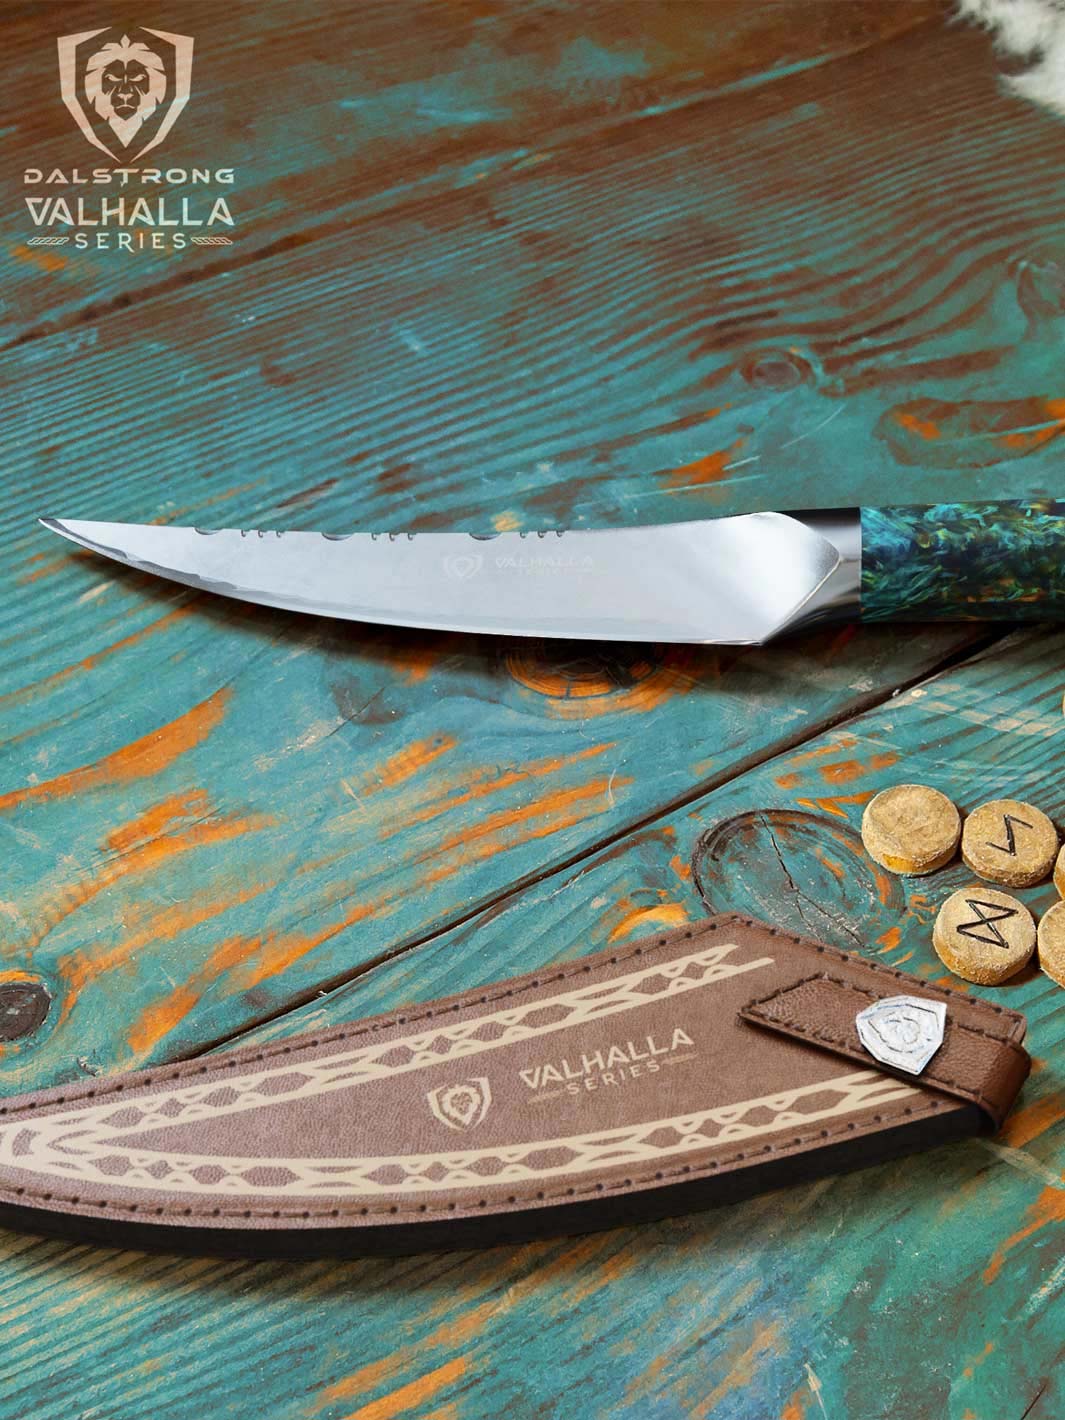 Dalstrong Fillet Knife - 6.5 inch - Valhalla Series - 9CR18MOV HC Steel - Celestial Resin & Wood Handle Kitchen Knife - Meat Cutting, Carving, Bone